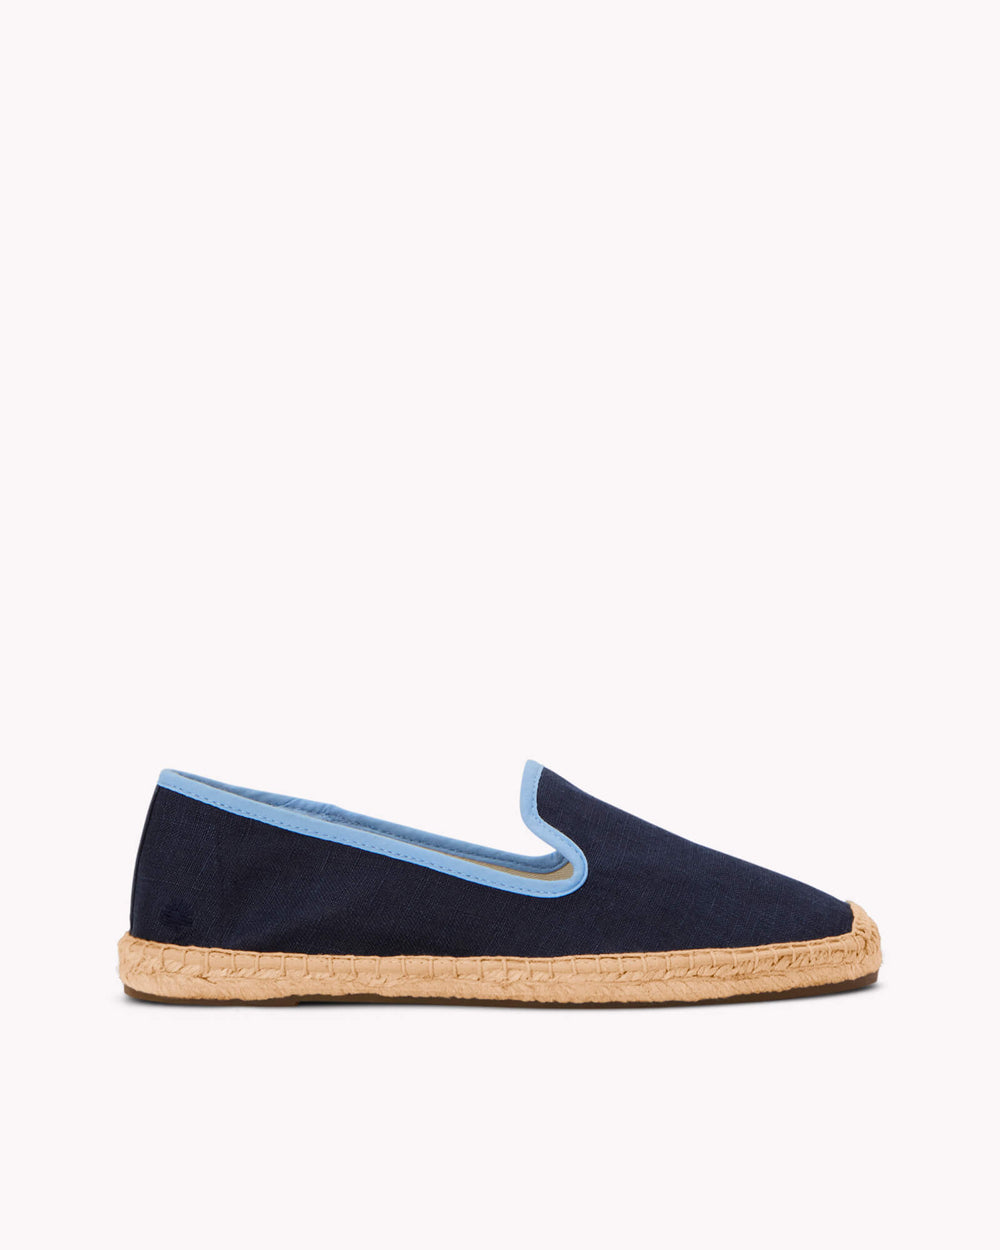 Women's navy espadrille shoes with light blue piping on gray background